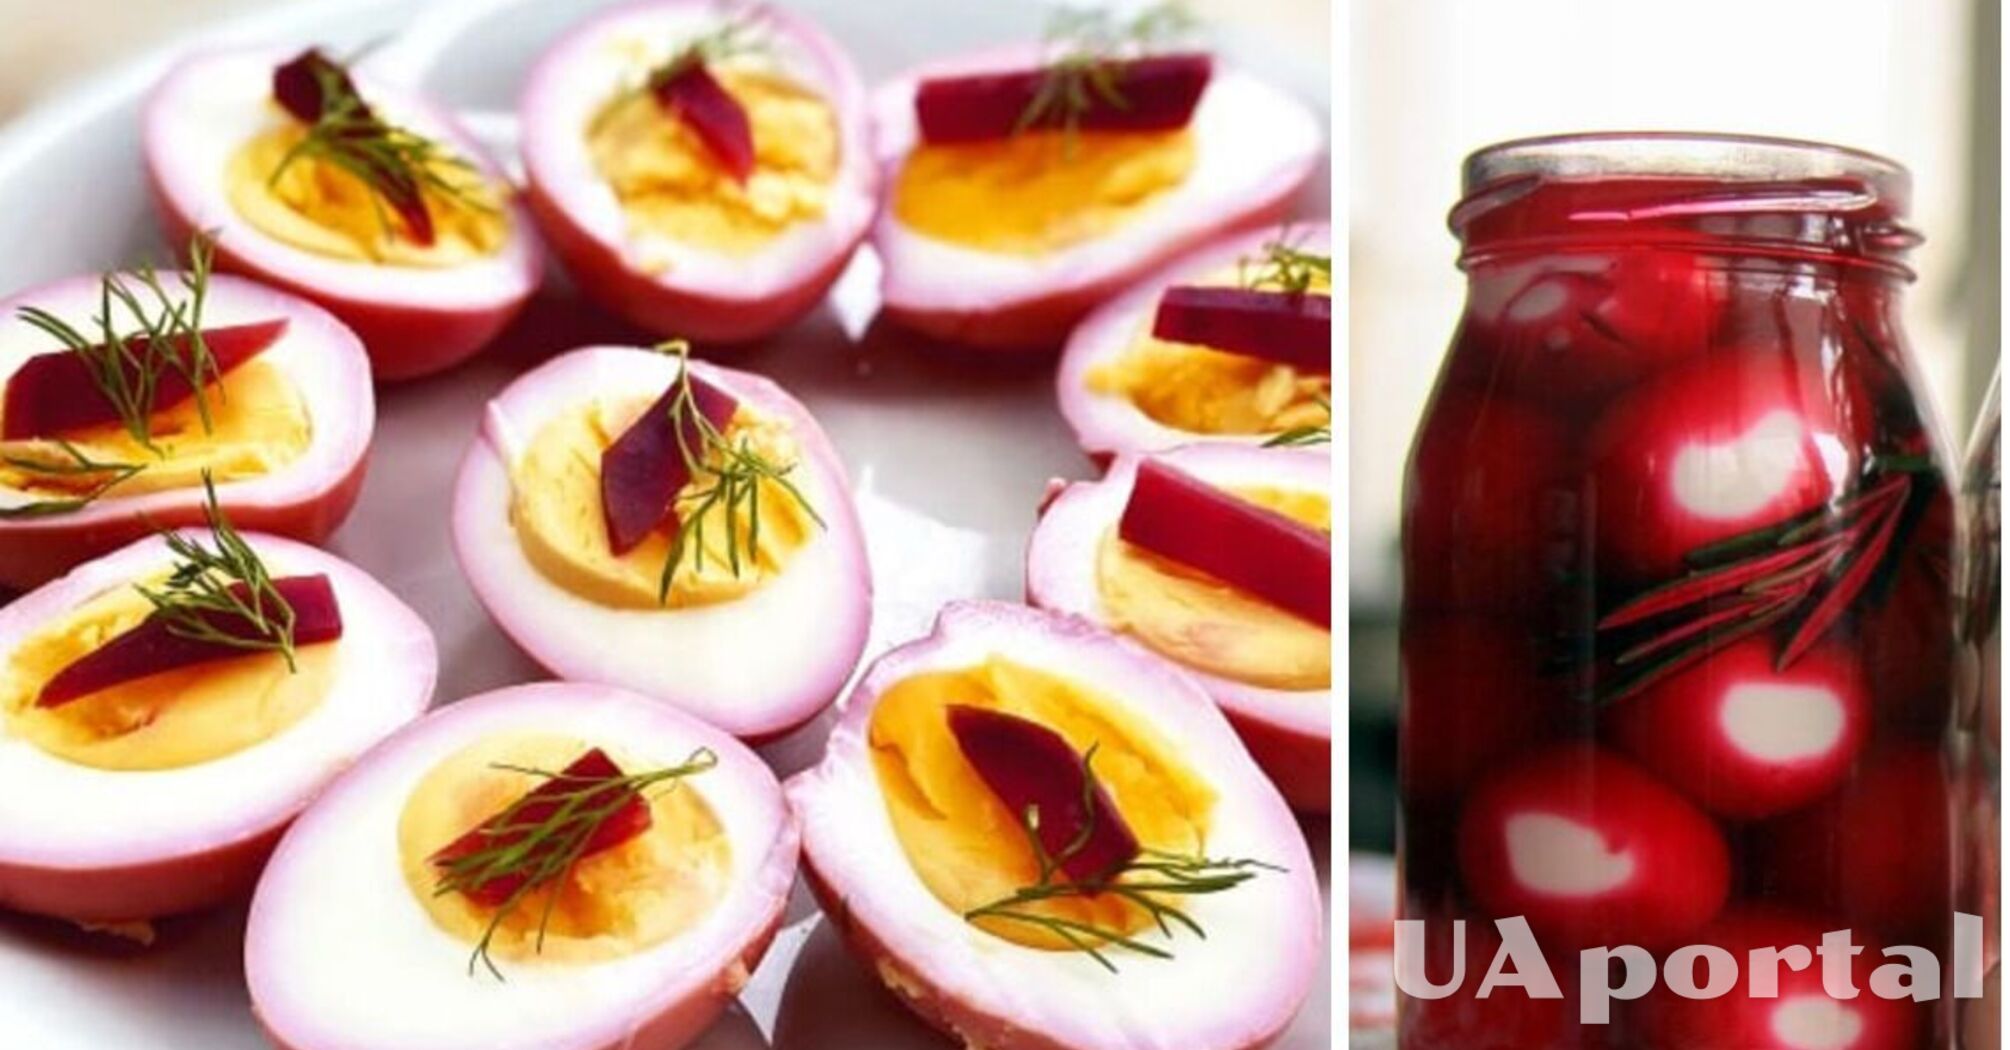 Surprise everyone: How to cook pickled eggs in just 1 day